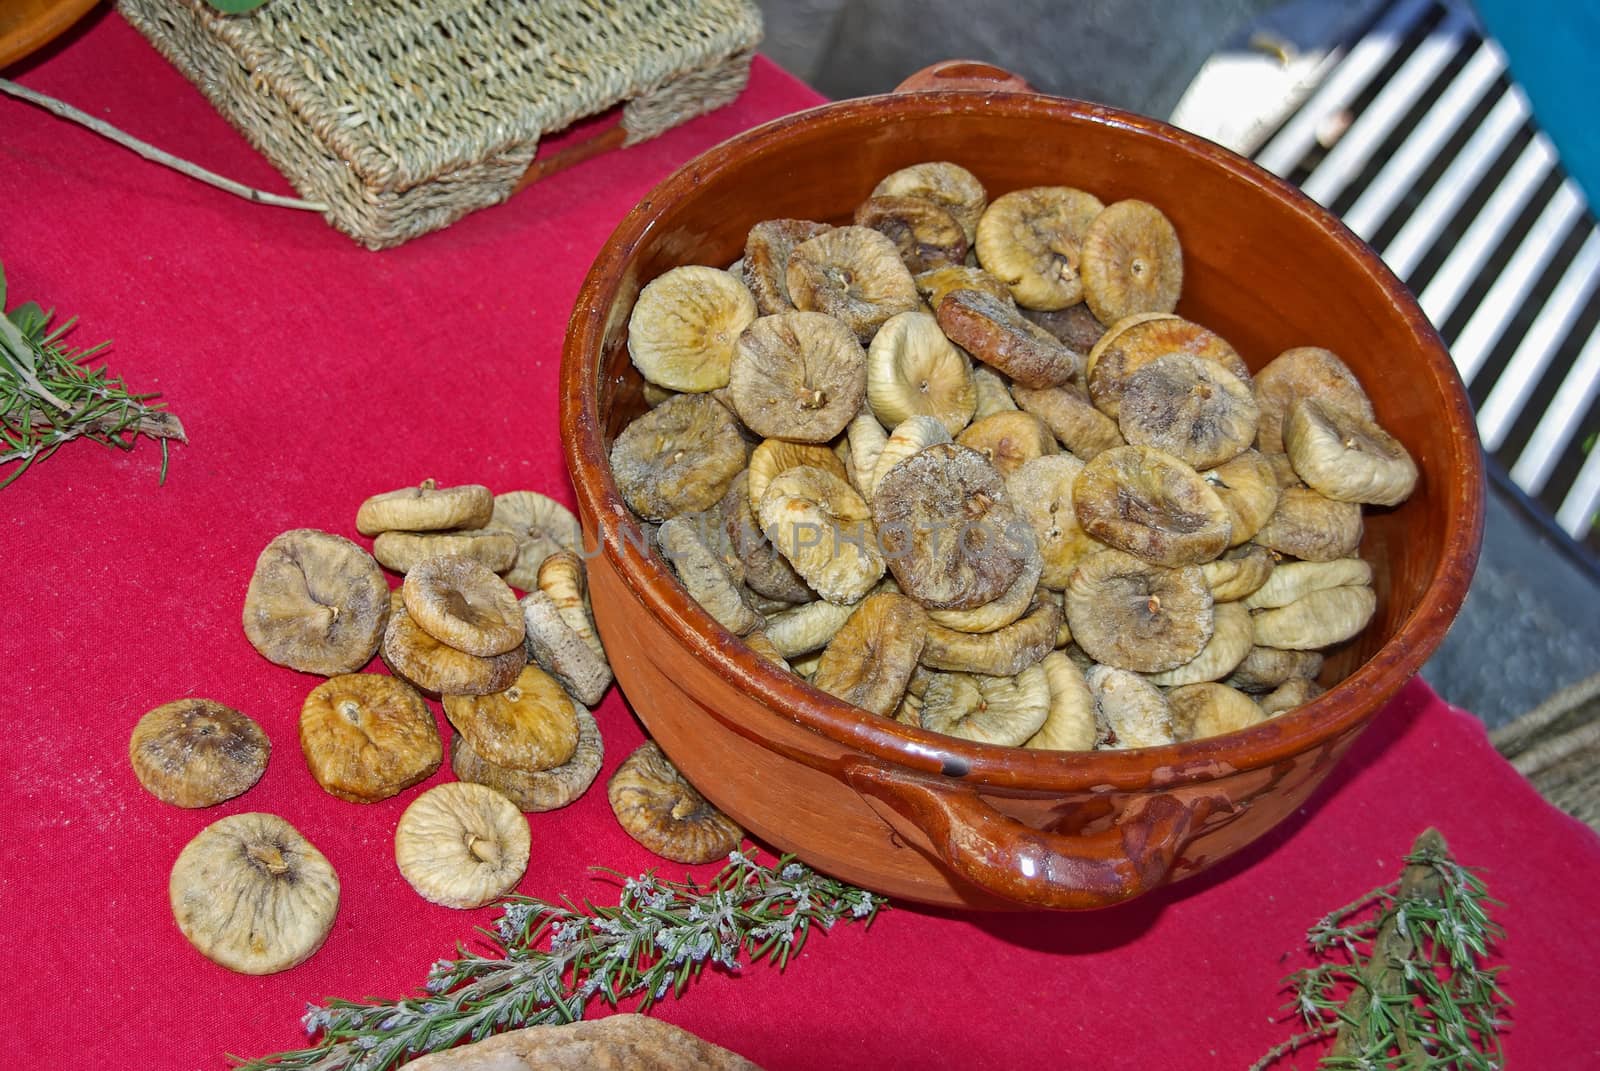 Typical plate of dry figs in Majorca (Spain)